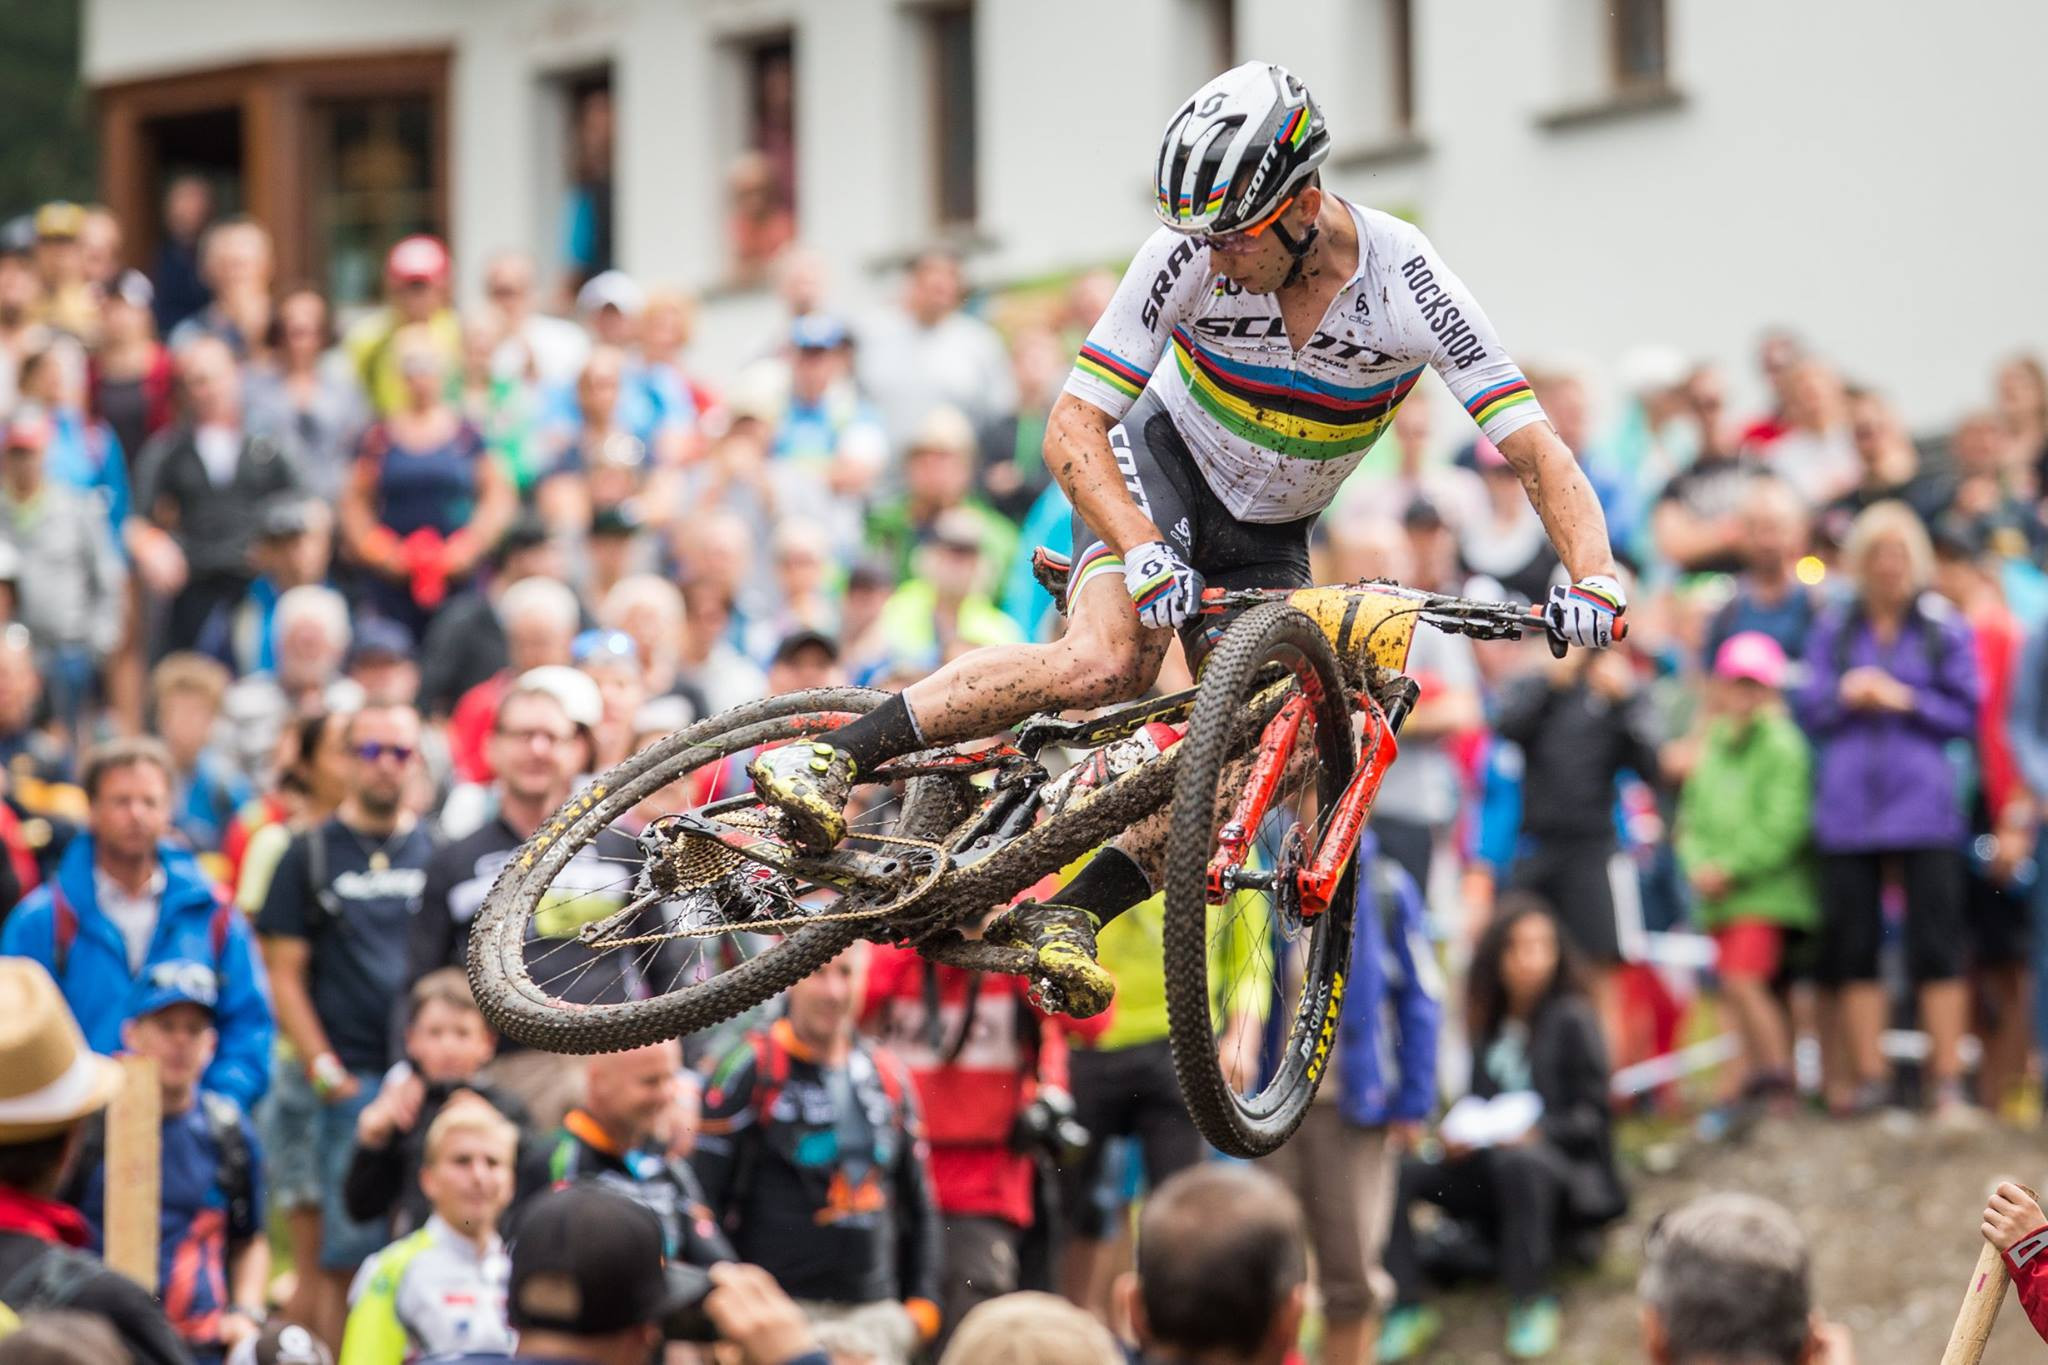 Home rider Schurter targets seventh cross-country title at UCI Mountain Bike World Championships in Switzerland